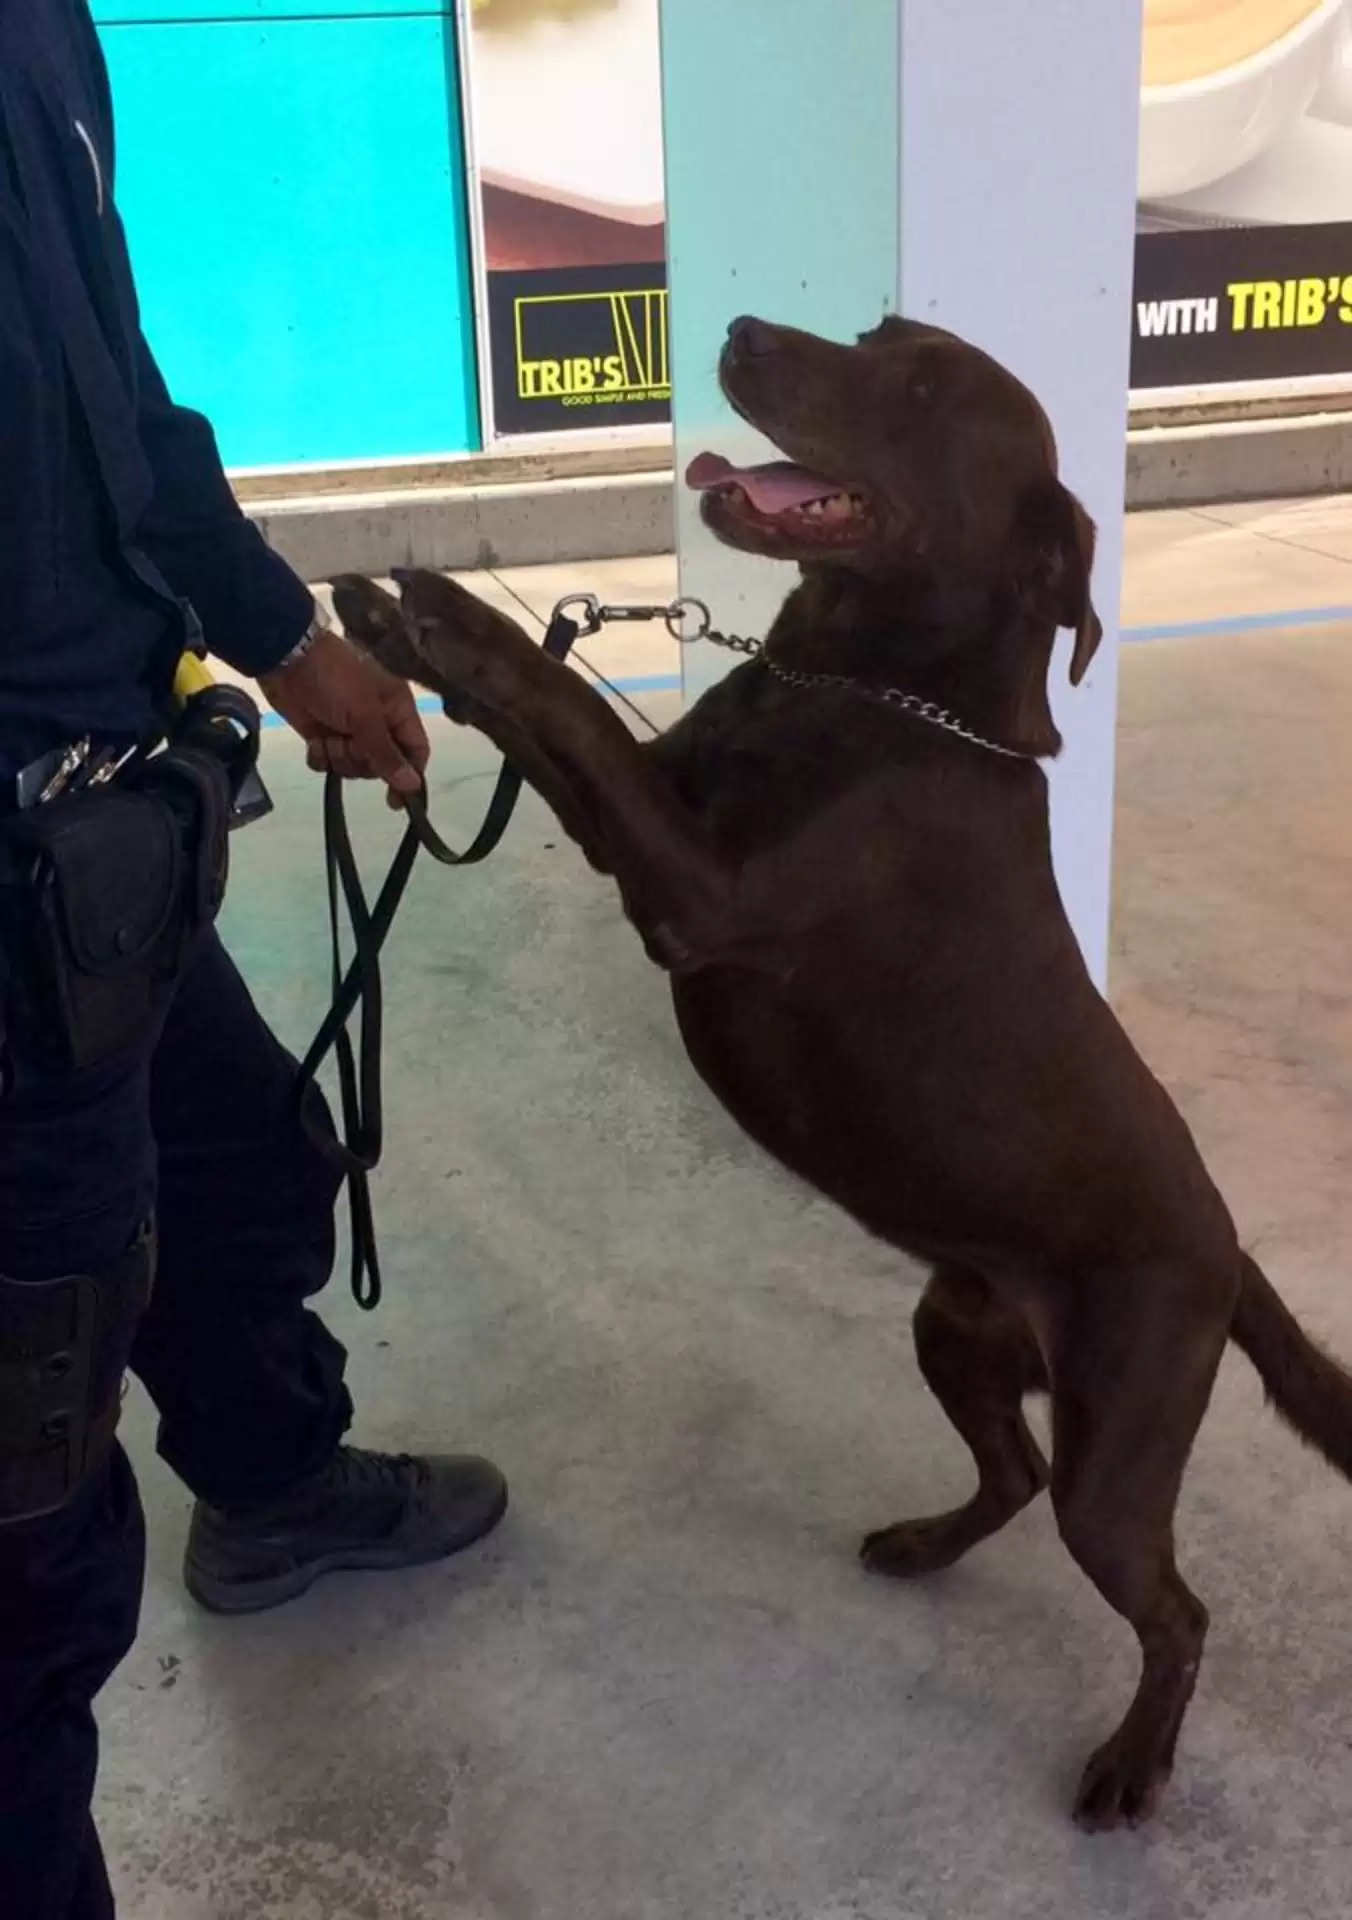 Woman's Trip Becomes Outstanding at Airport as Result of Lively Police Dog's Presence